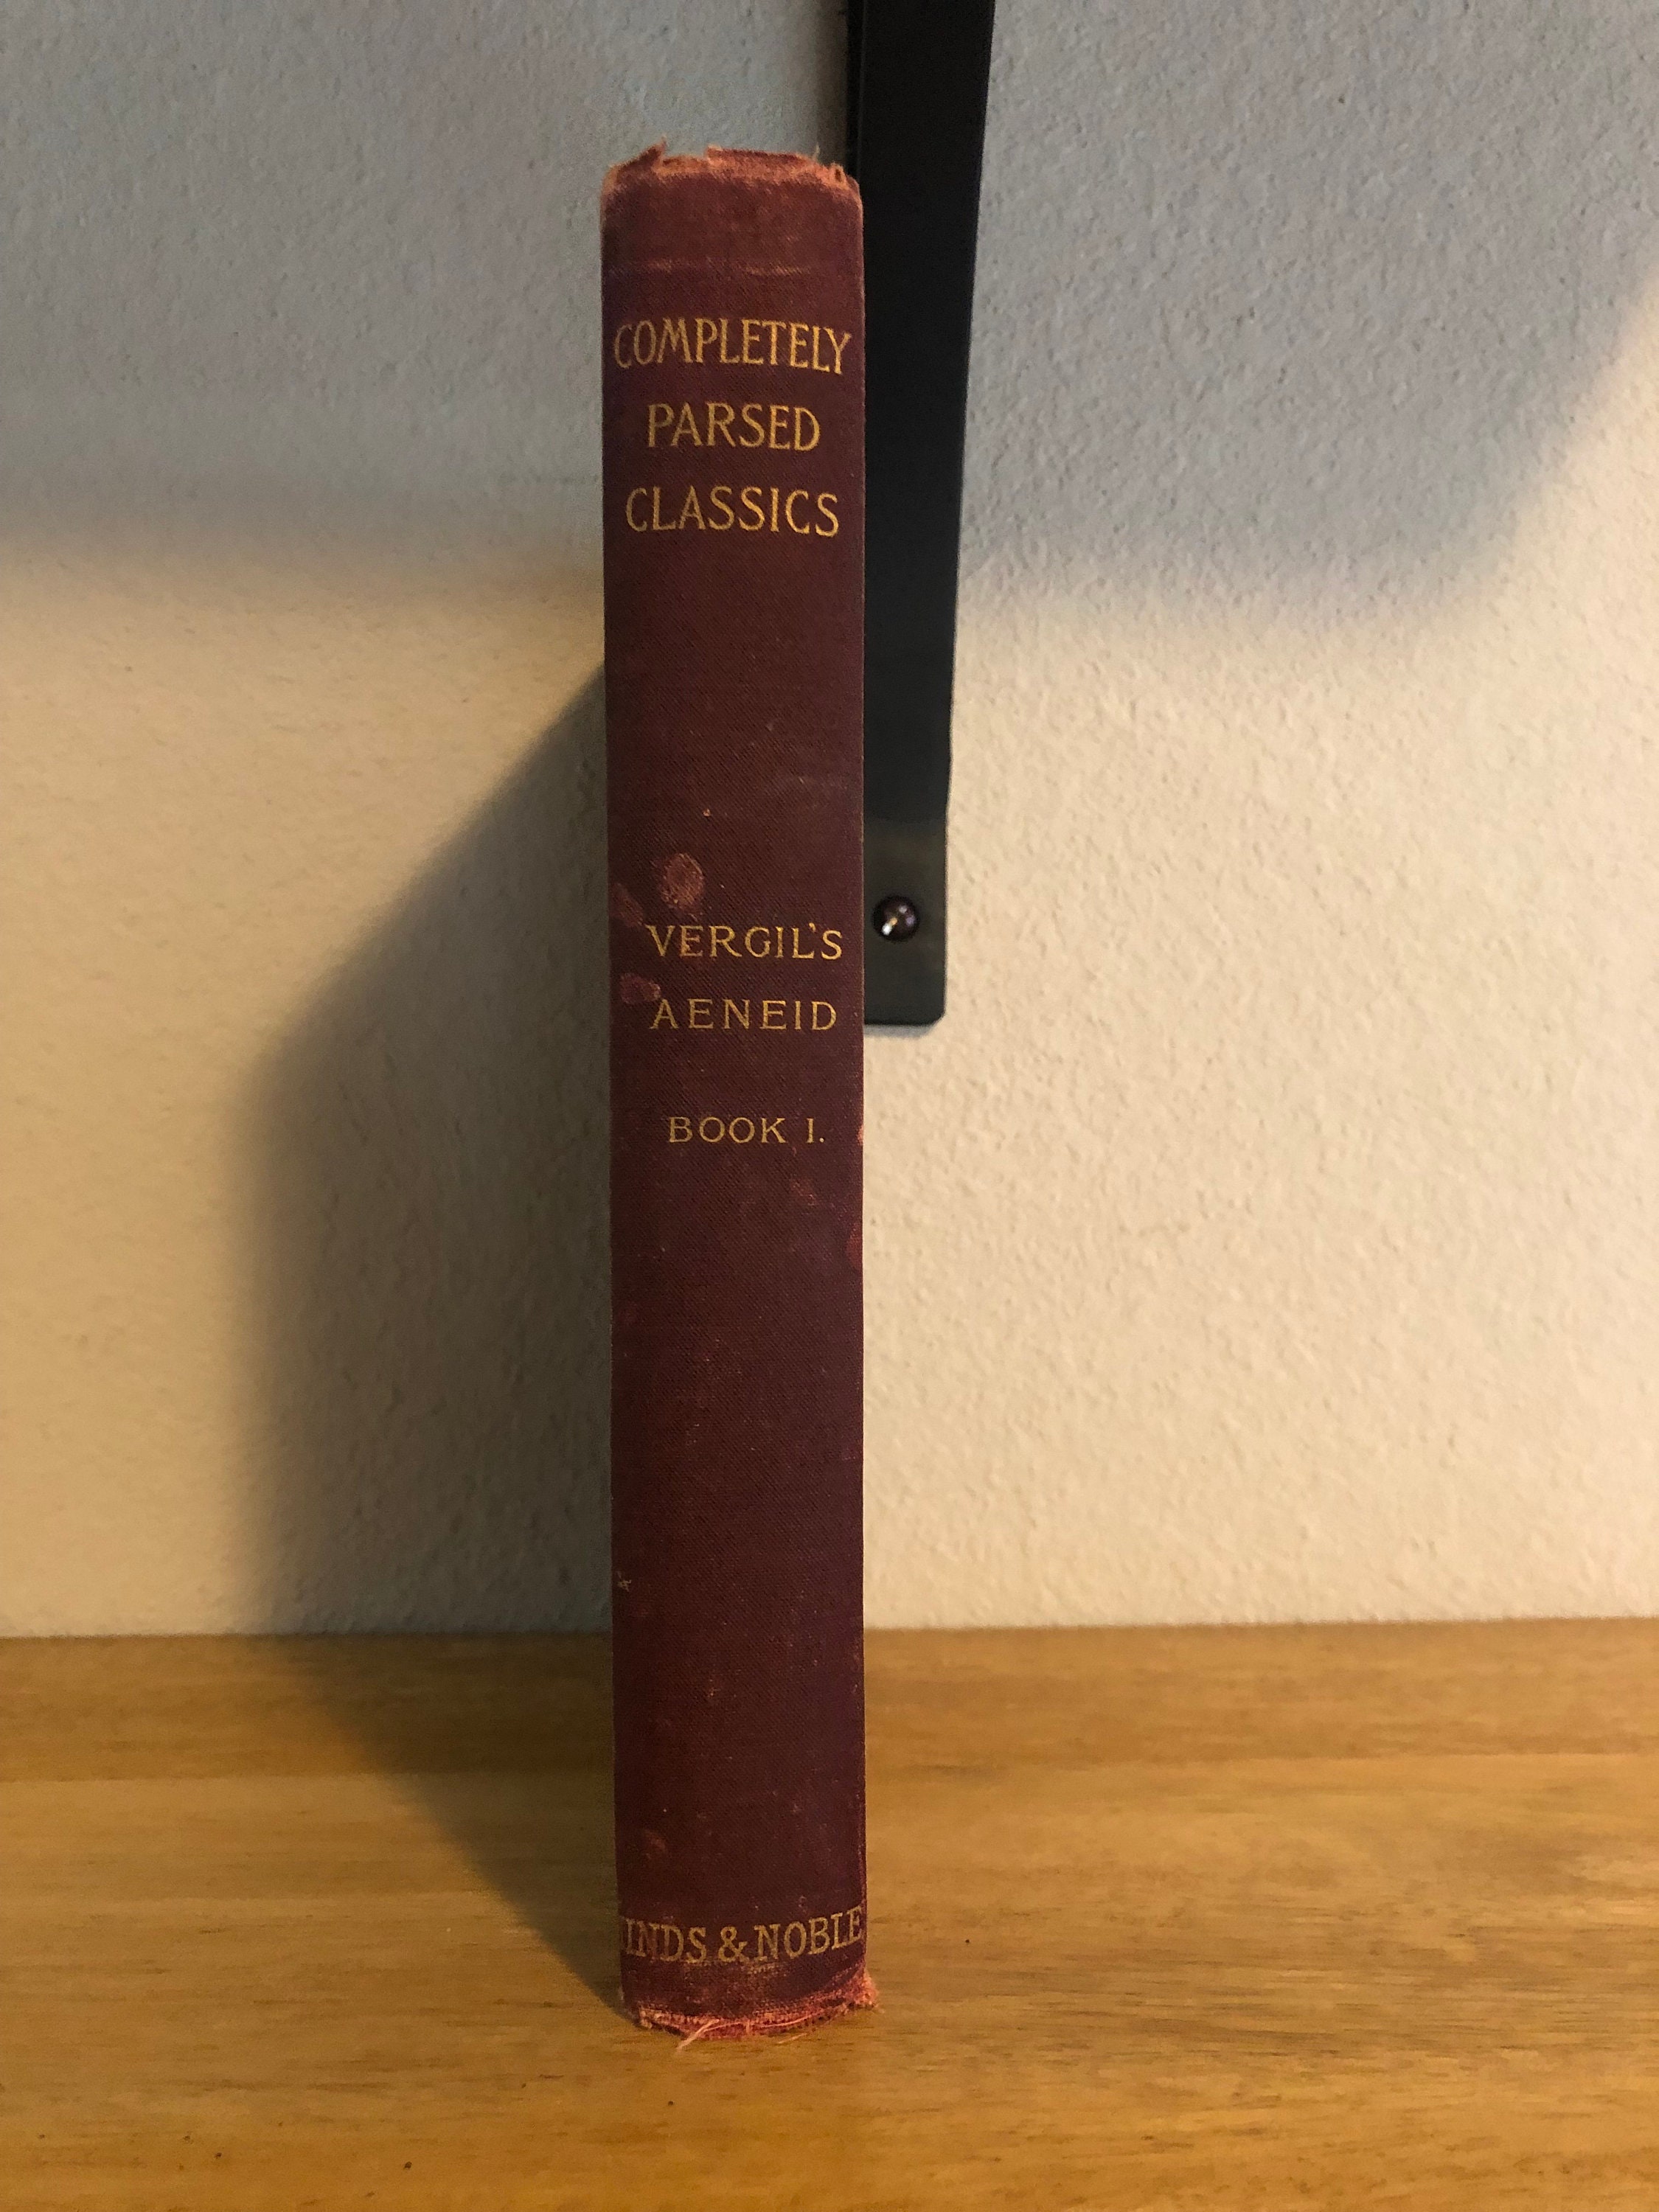 The Aeneid - Paperback By Vergil - 1961 Complete and Unabridged - Rare